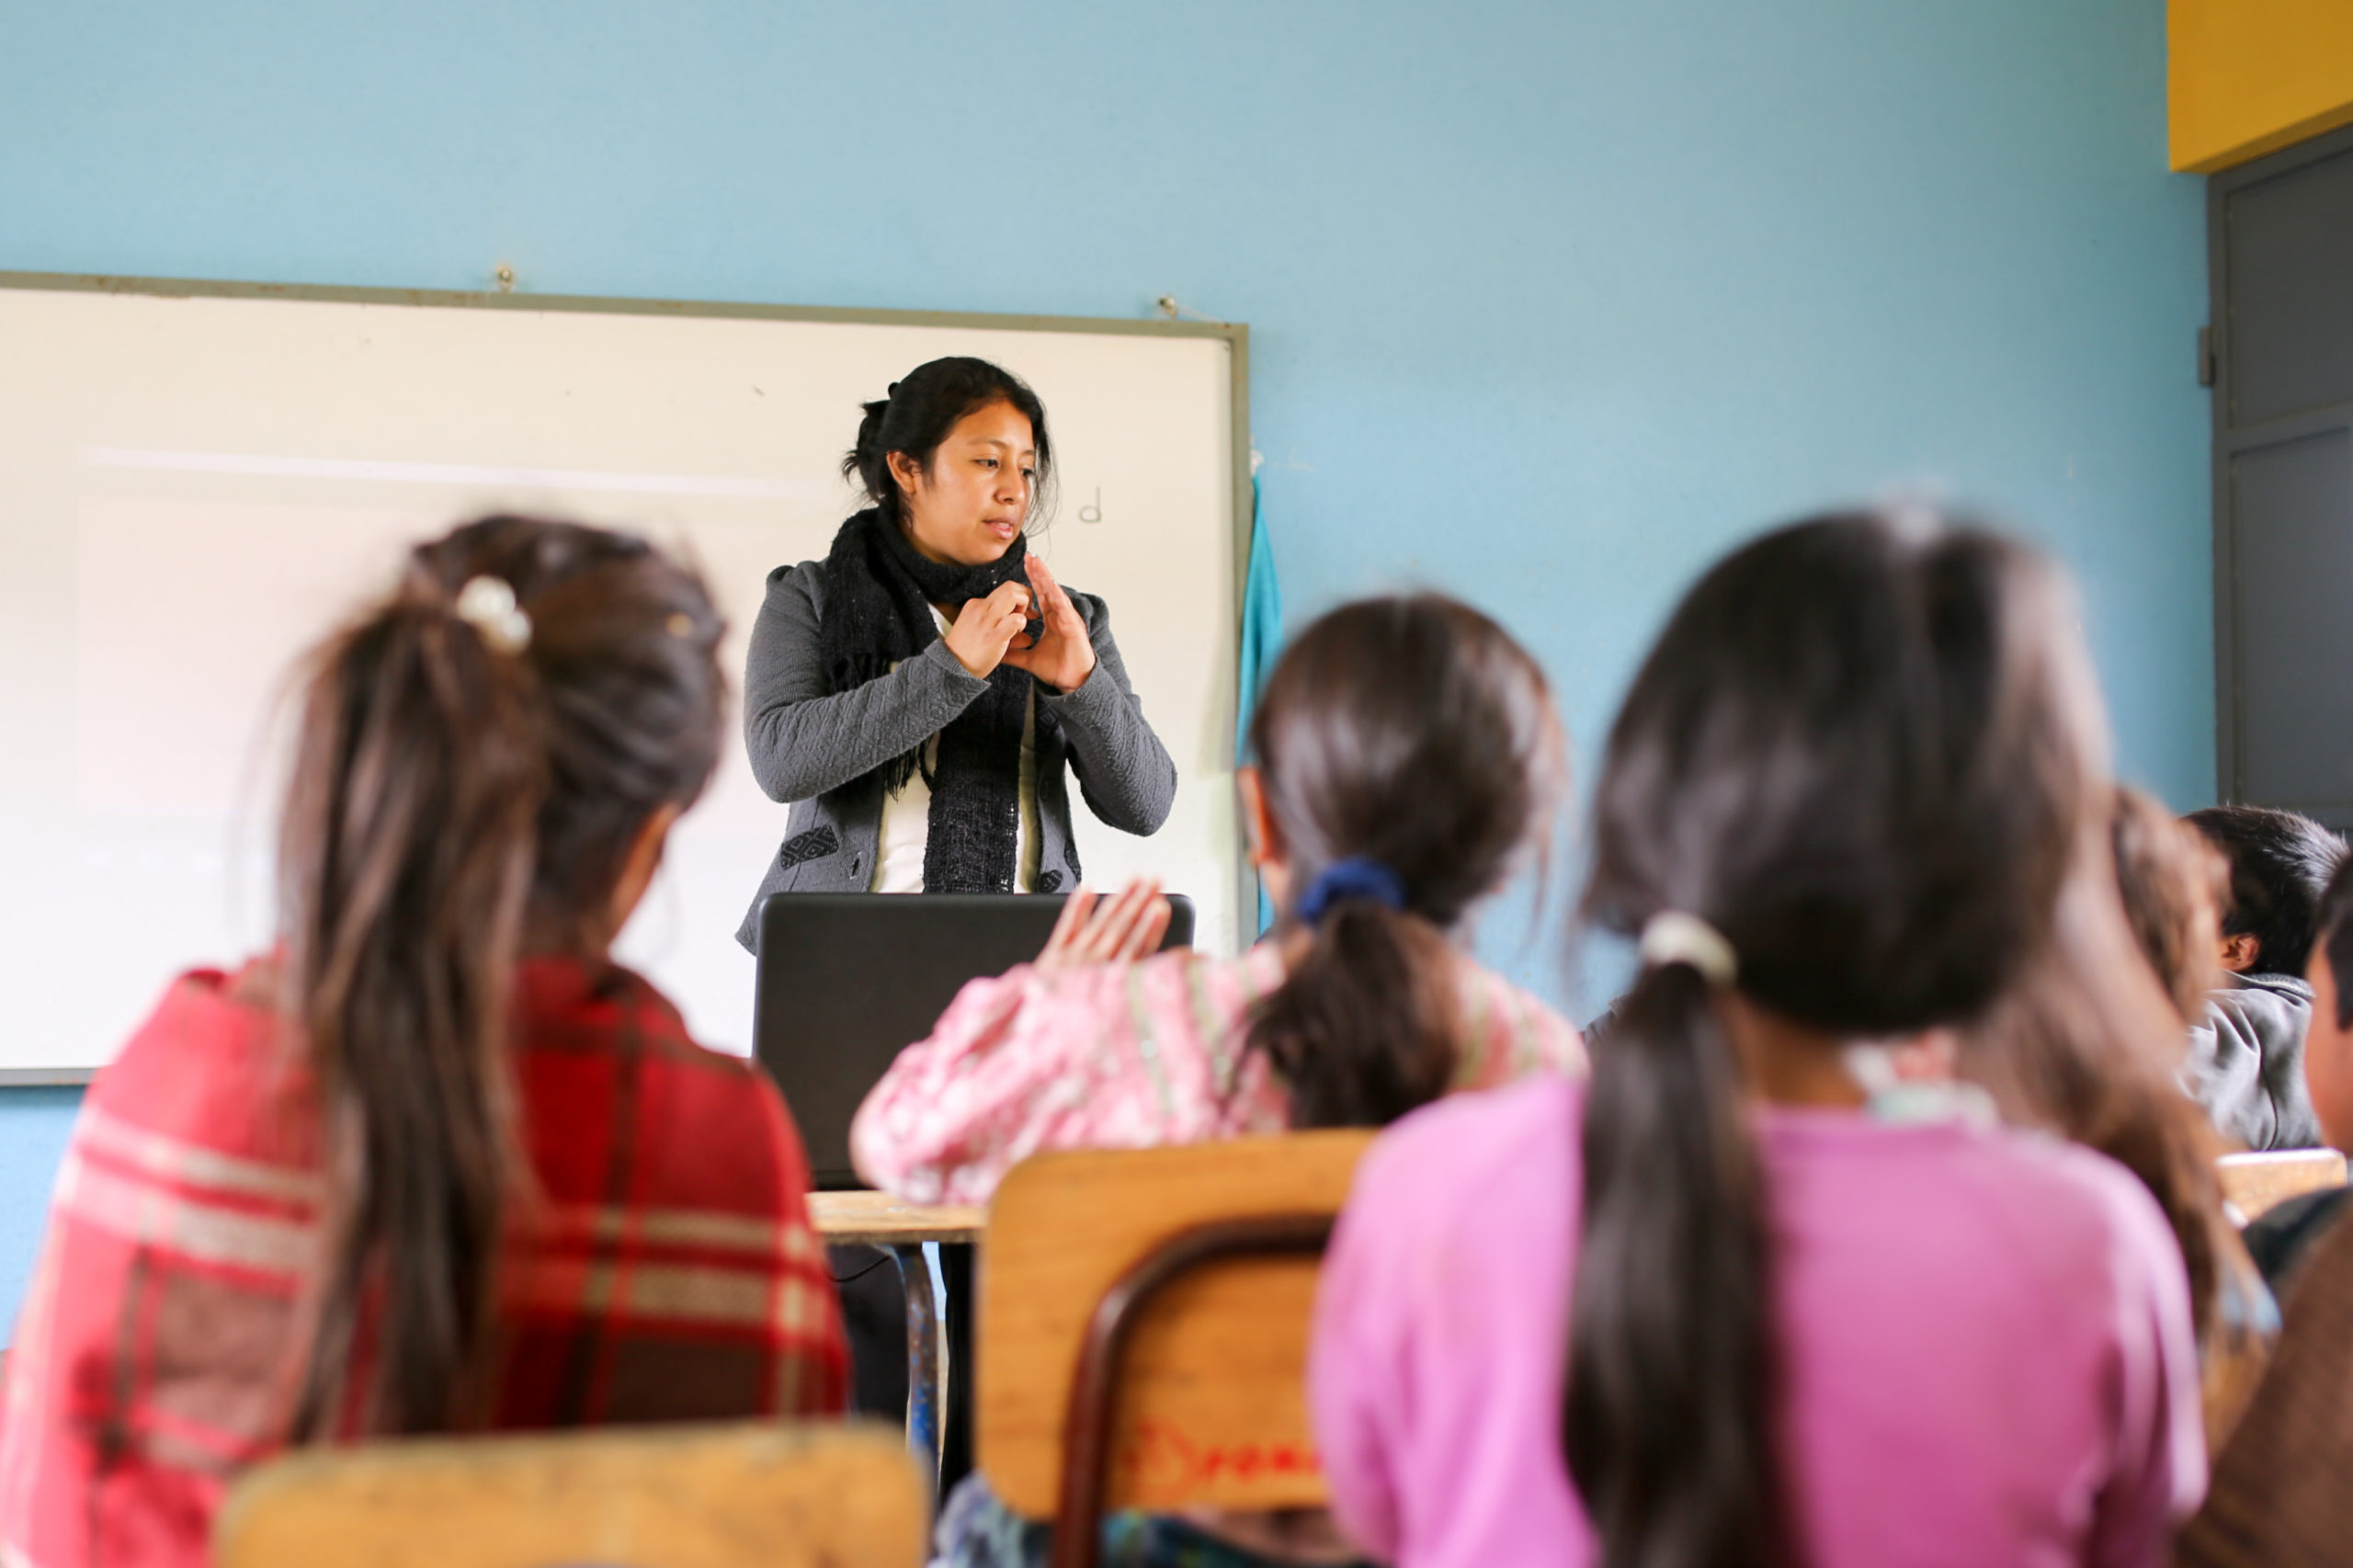 Photo description: A teacher in Guatemala leads a lesson at the front of a classroom | Photo credit: Amanda Brown